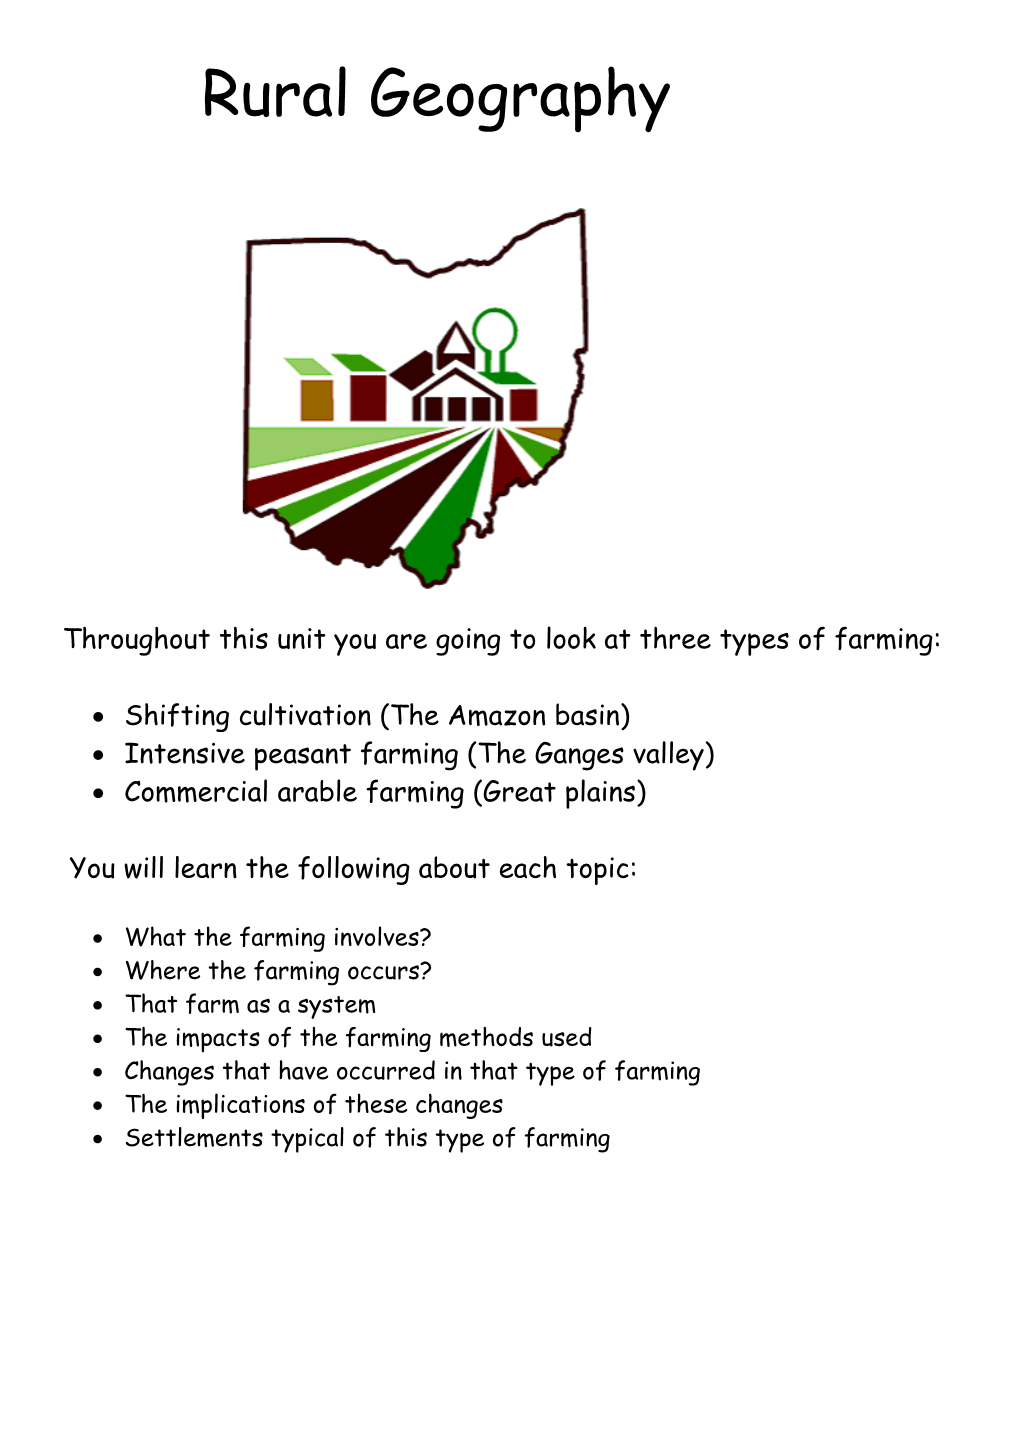 Throughout This Unit You Are Going to Look at Three Types of Farming